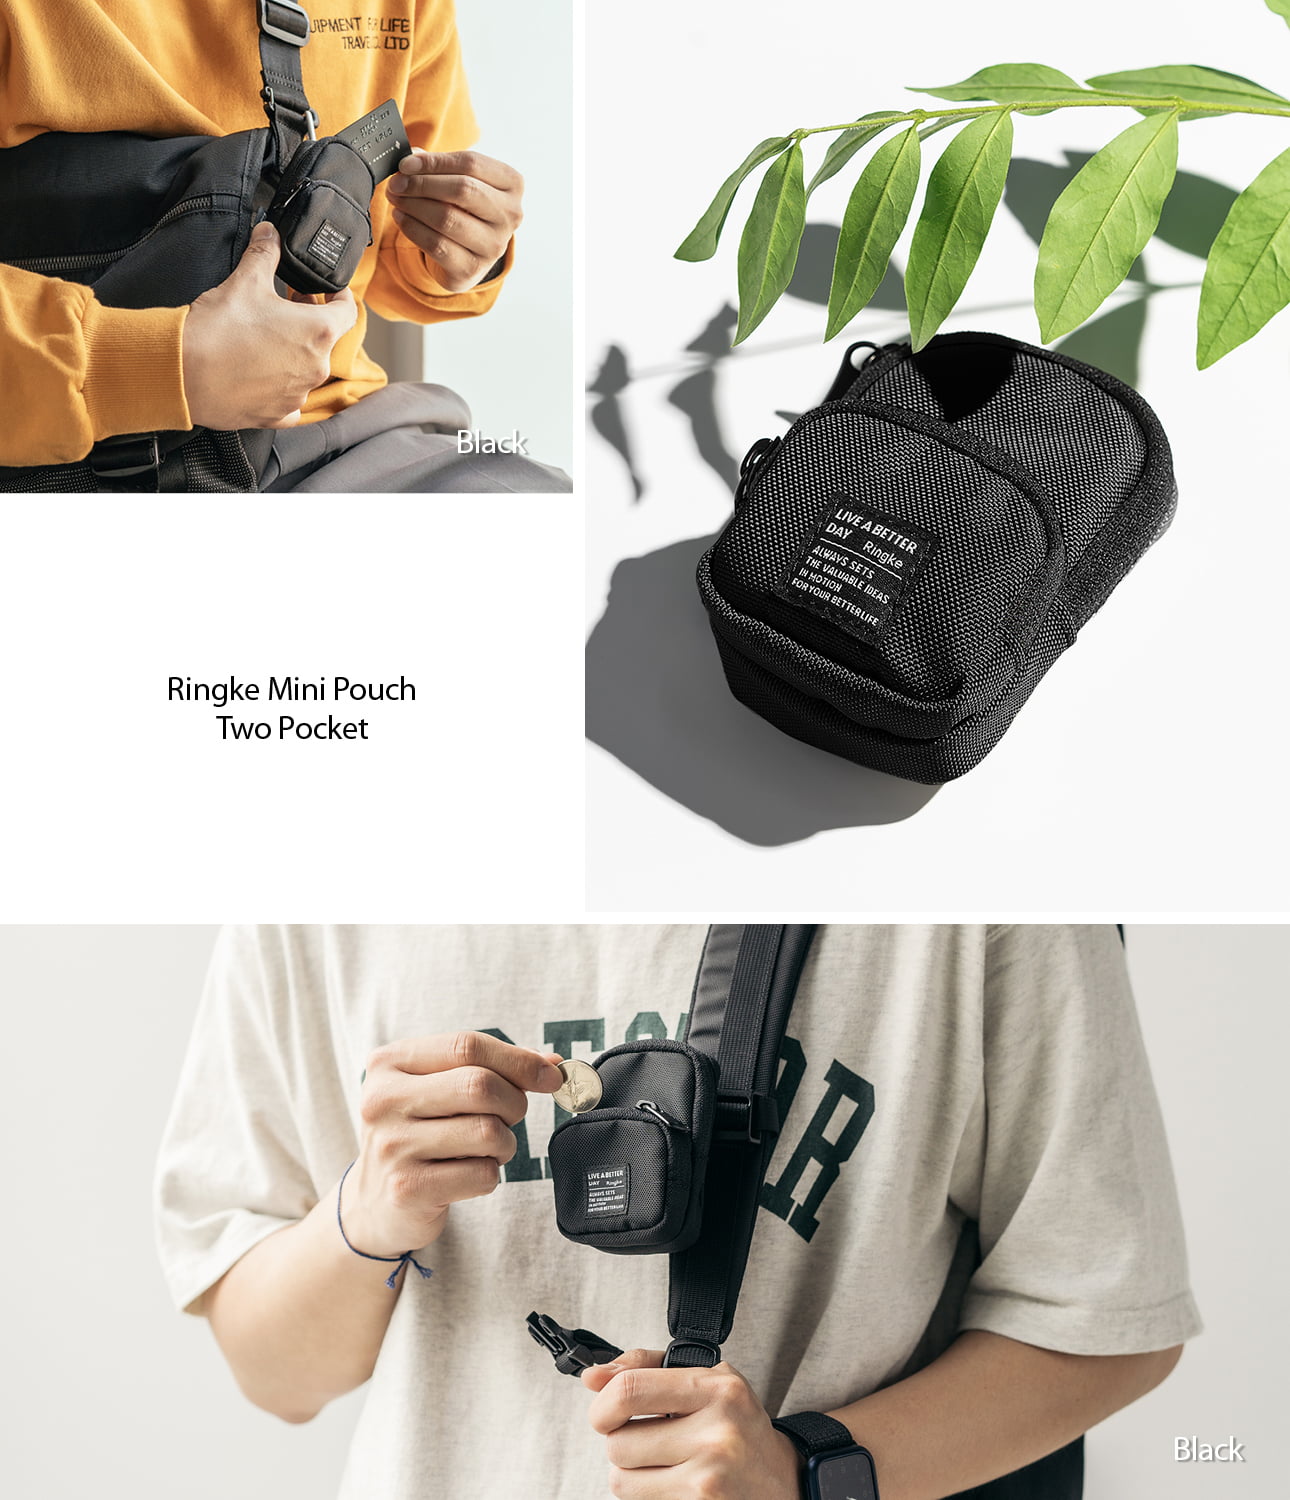 Ringke Mini Pouch [Bucket Bag] with O Ring Carabiner, Nylon Carrying Pouch  Small Bag for AirPods, Ga…See more Ringke Mini Pouch [Bucket Bag] with O